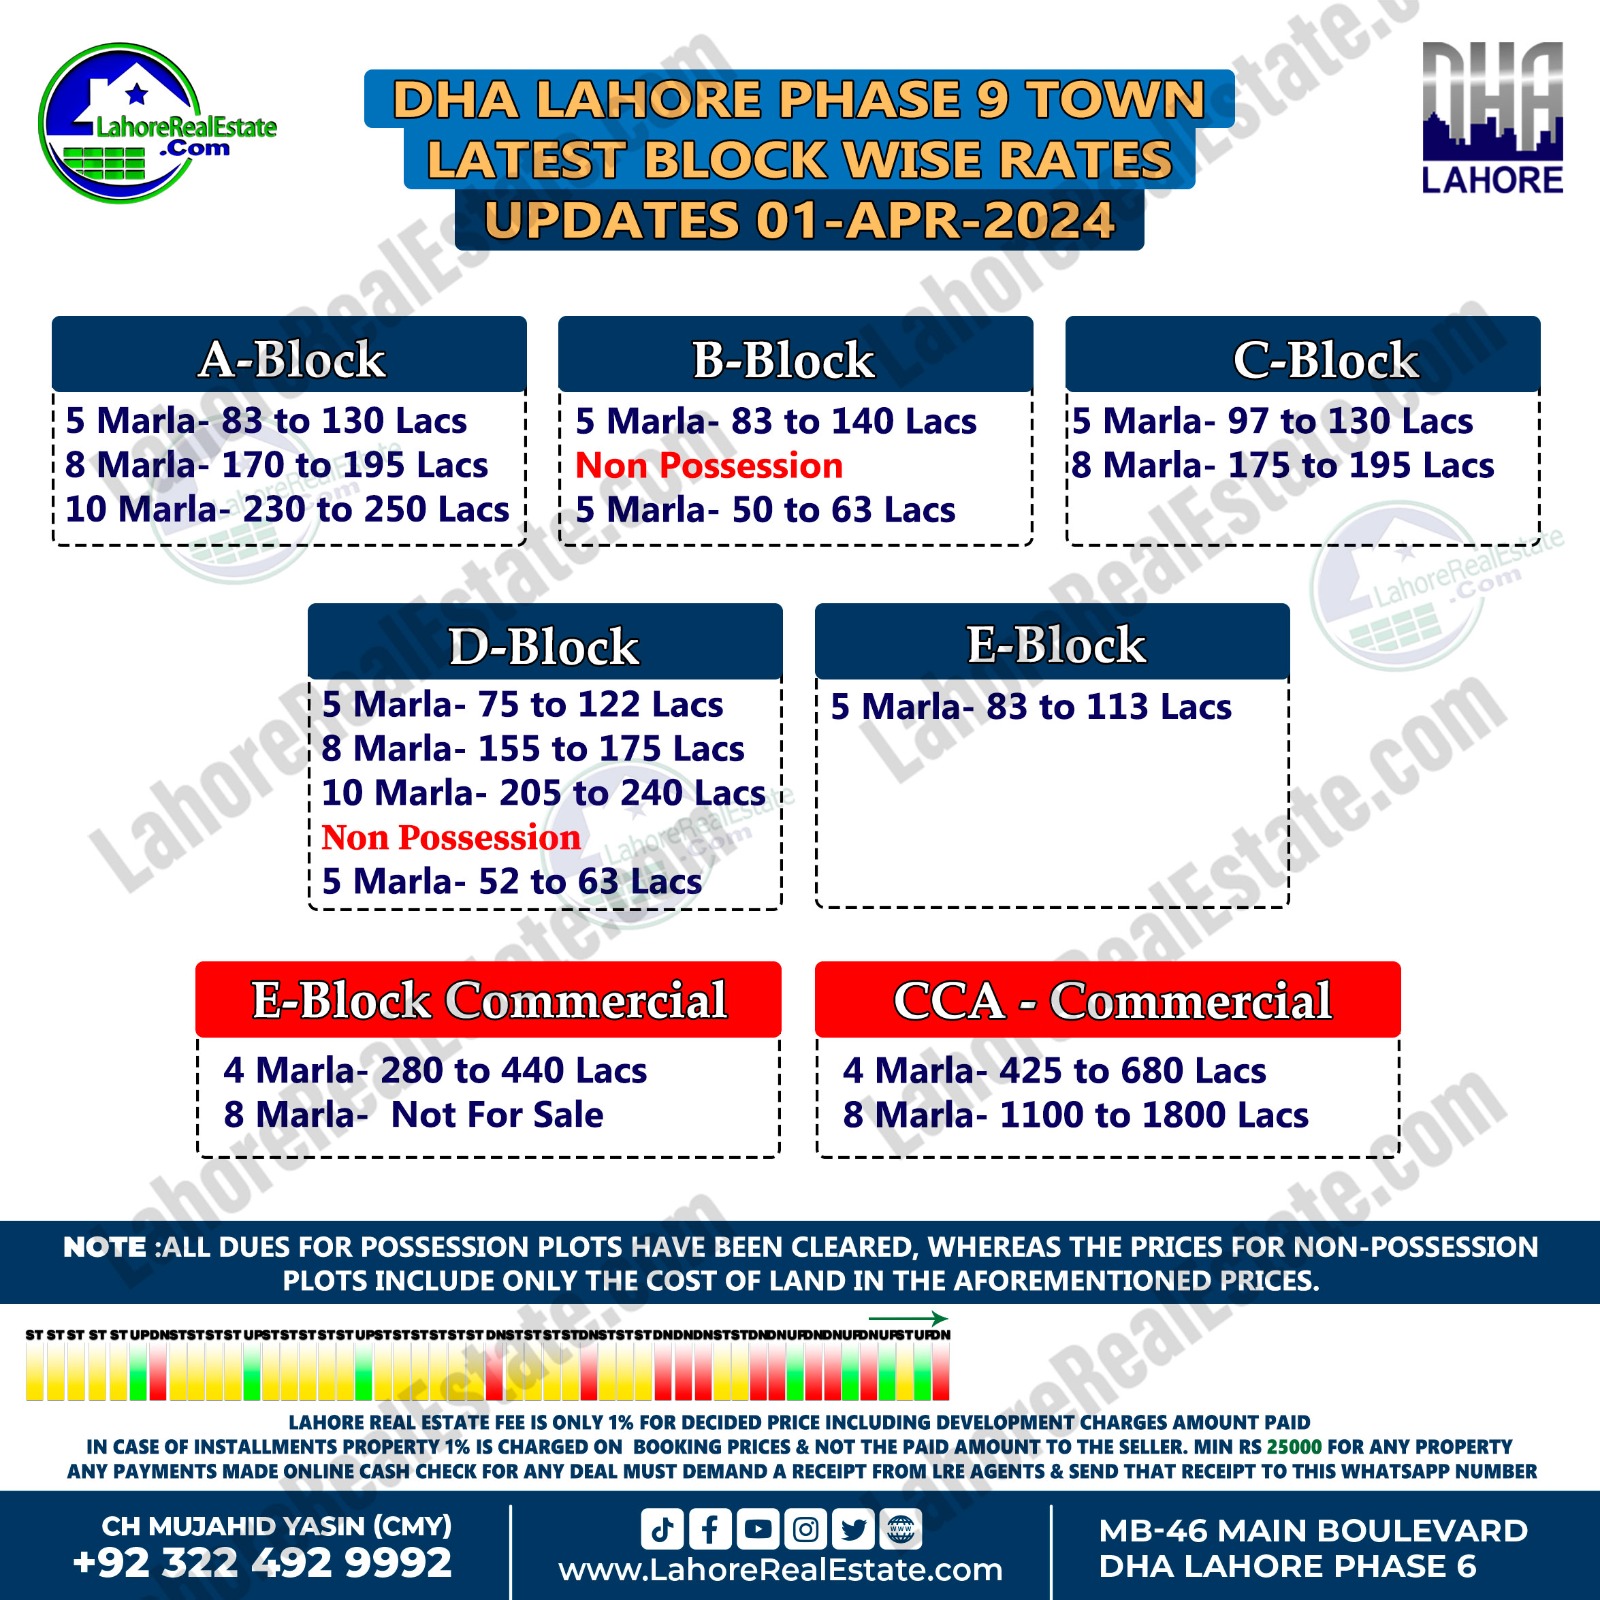 DHA Lahore Phase 9 Town Plot Prices Update April 01, 2024